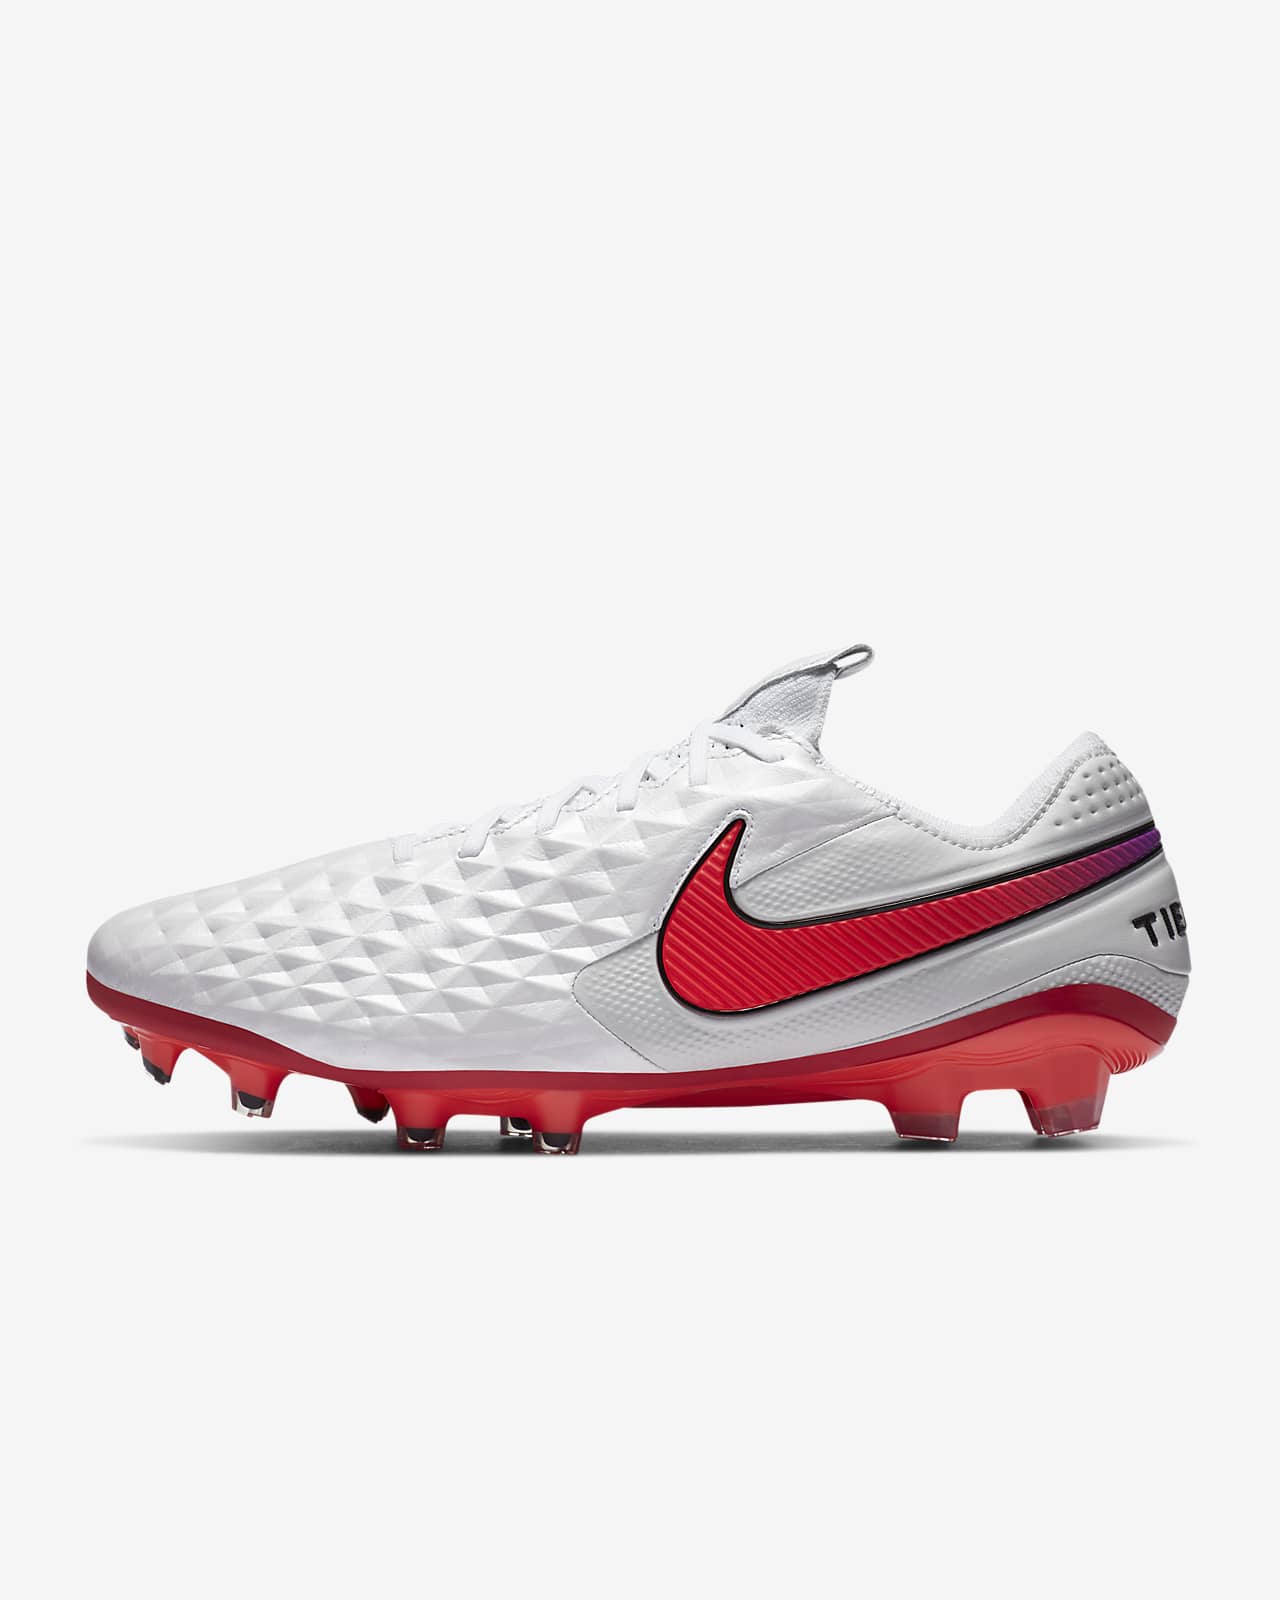 nike tiempo moulded football boots